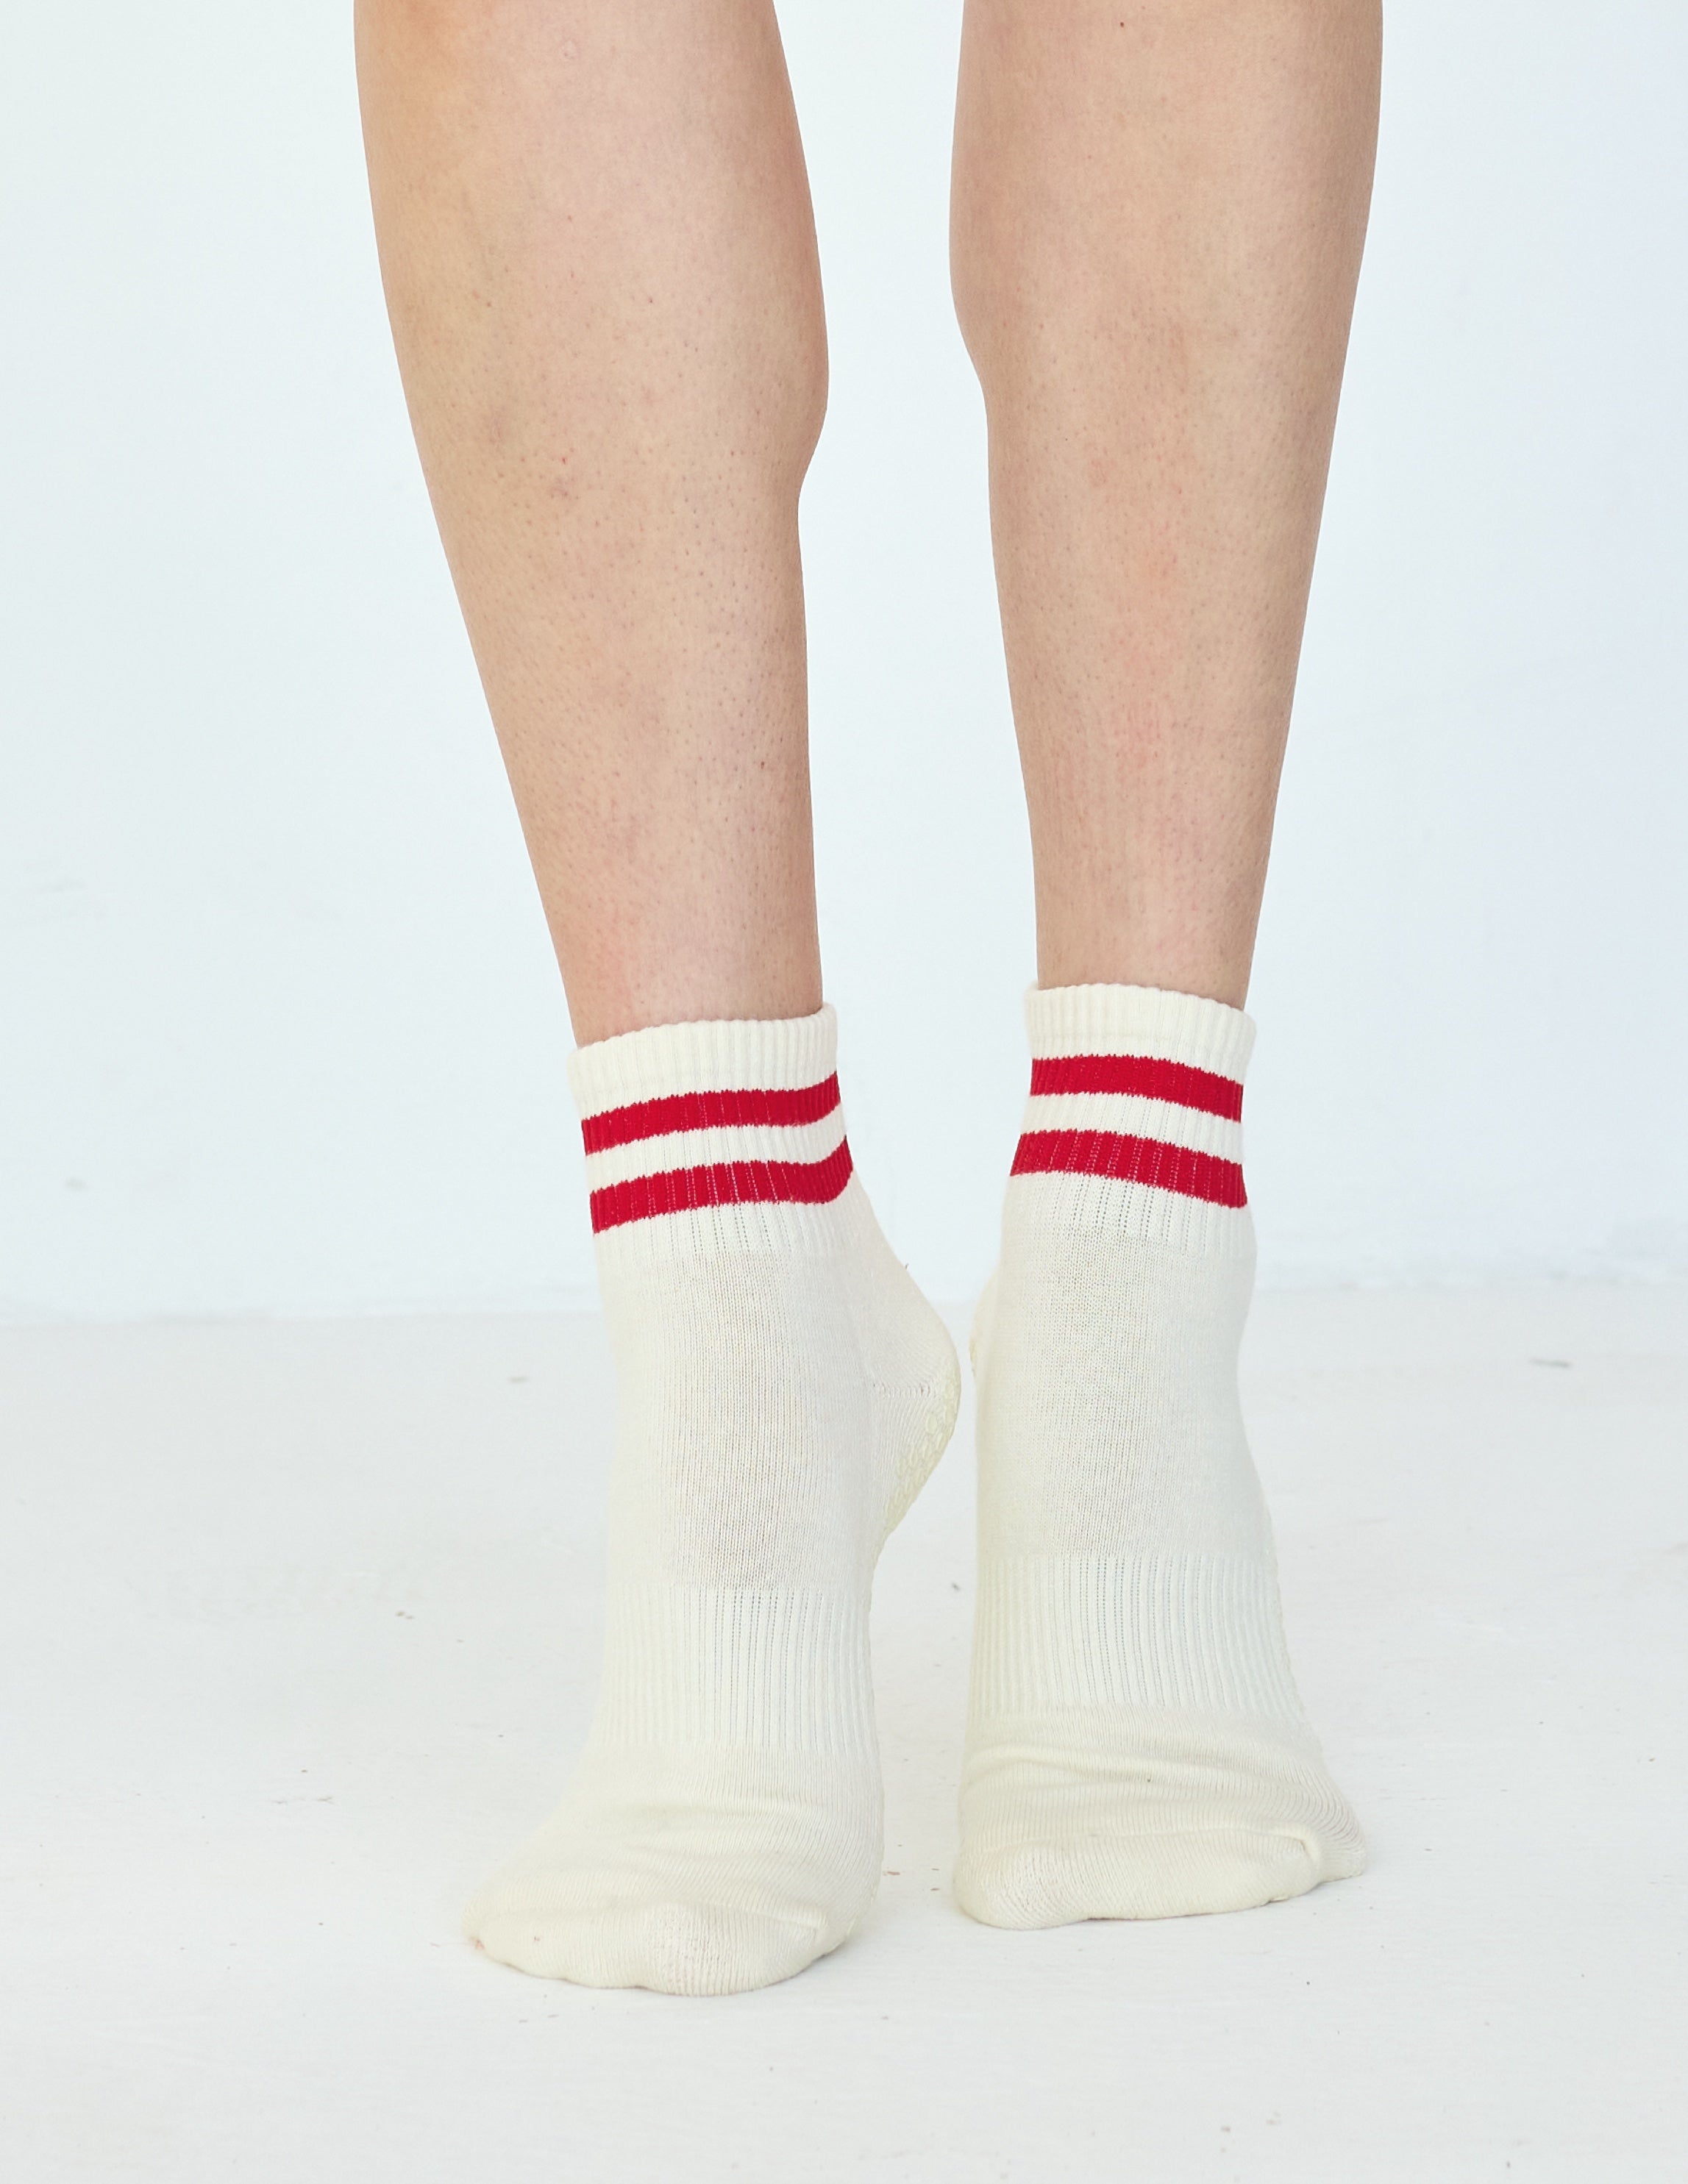 The Boyfriend Sock Off-White and Red